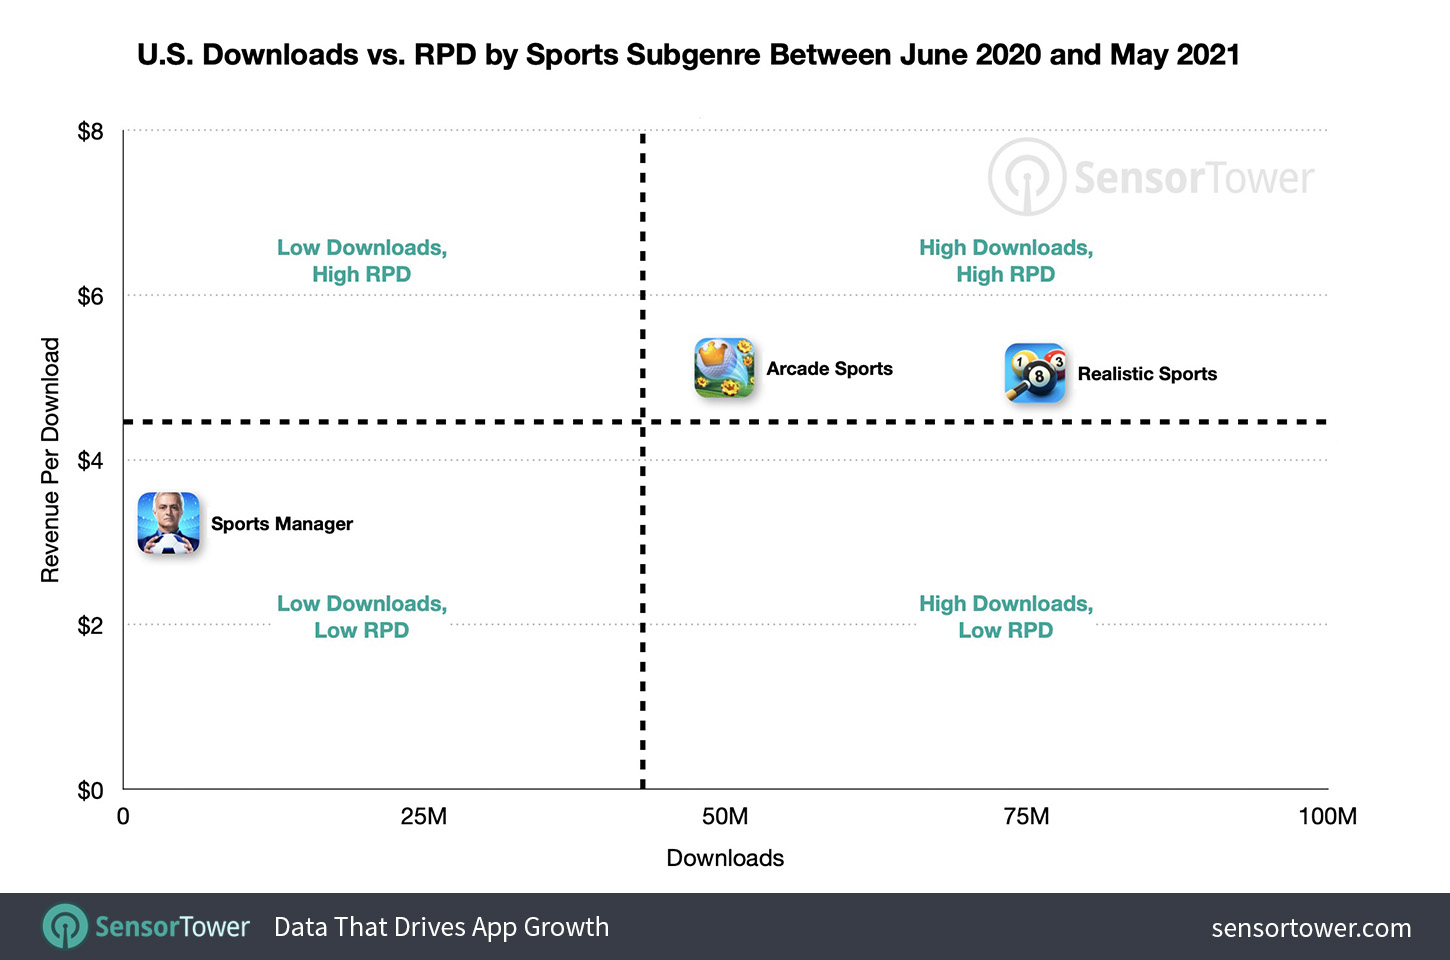 U.S. Downloads Vs. RPD by Sports Game Subgenre Between June 1, 2020 and May 31, 2021